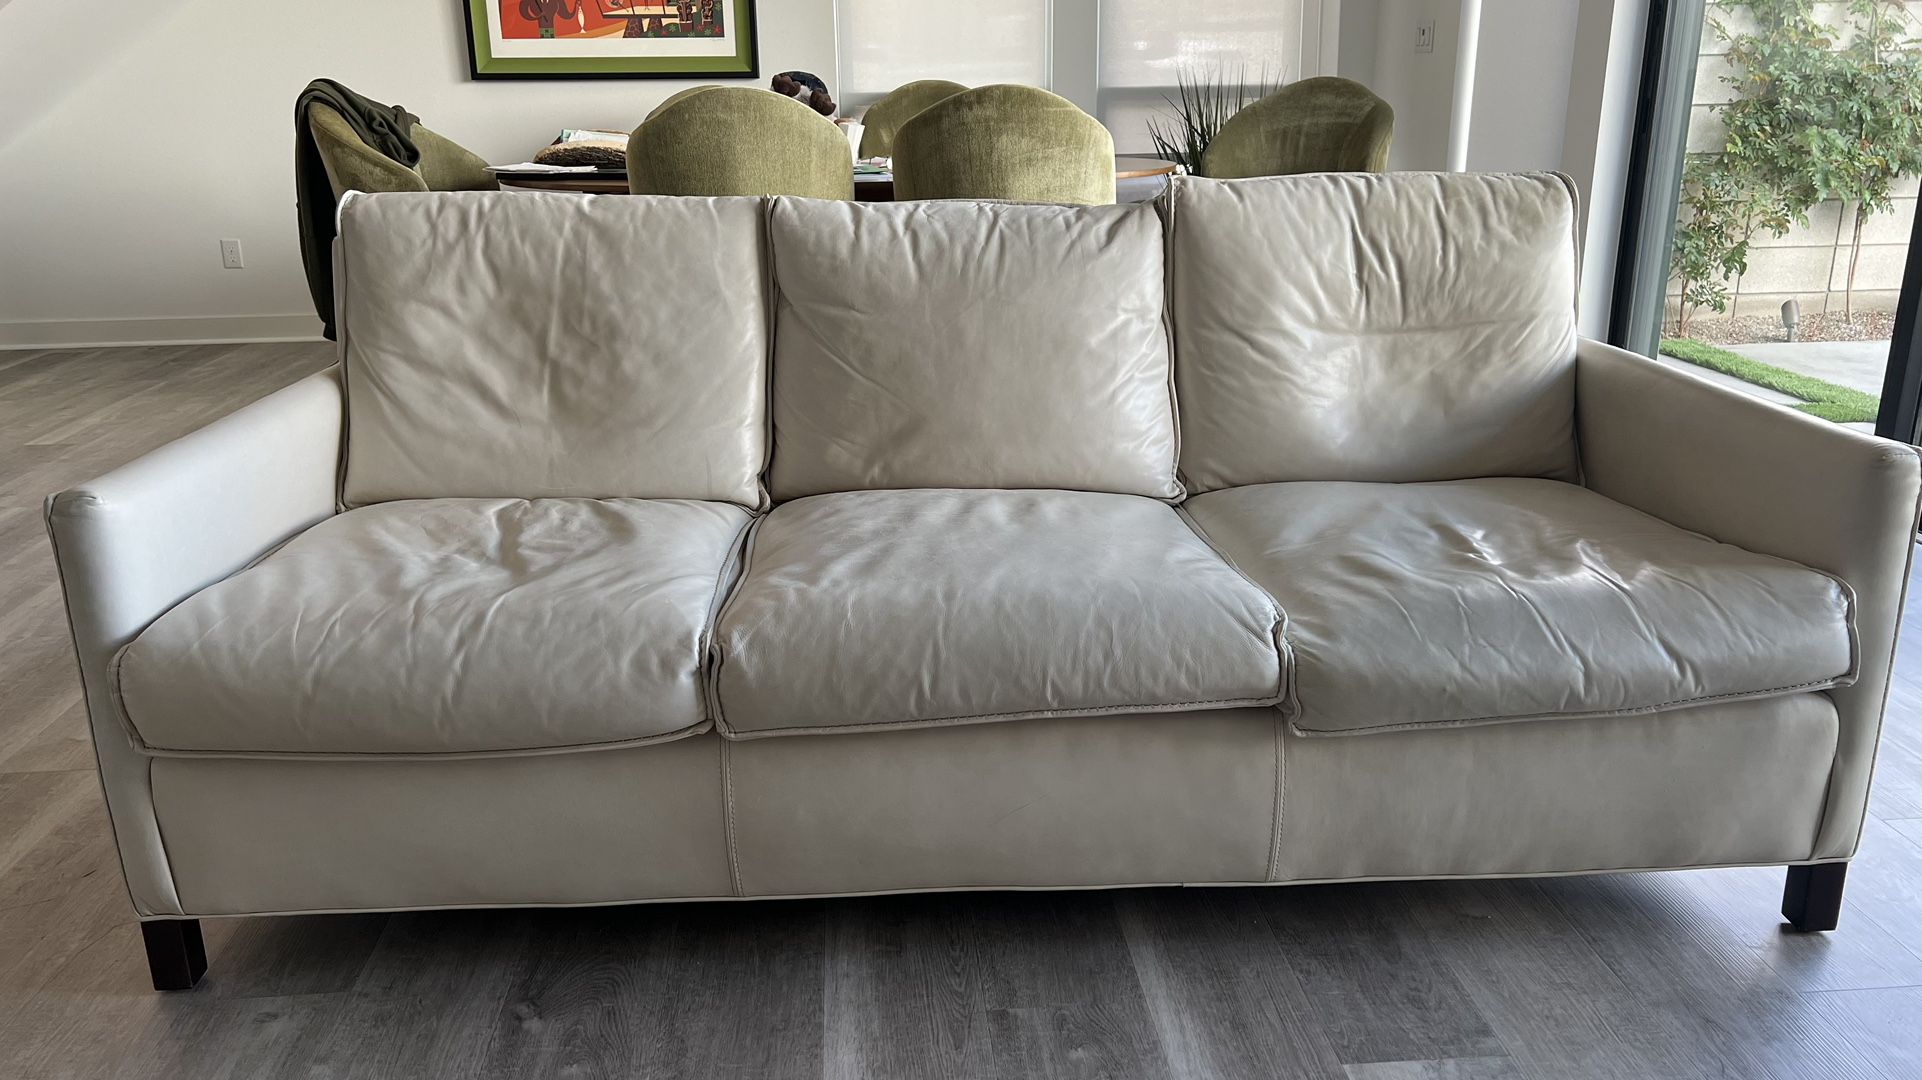 Room And Board Leather Couch